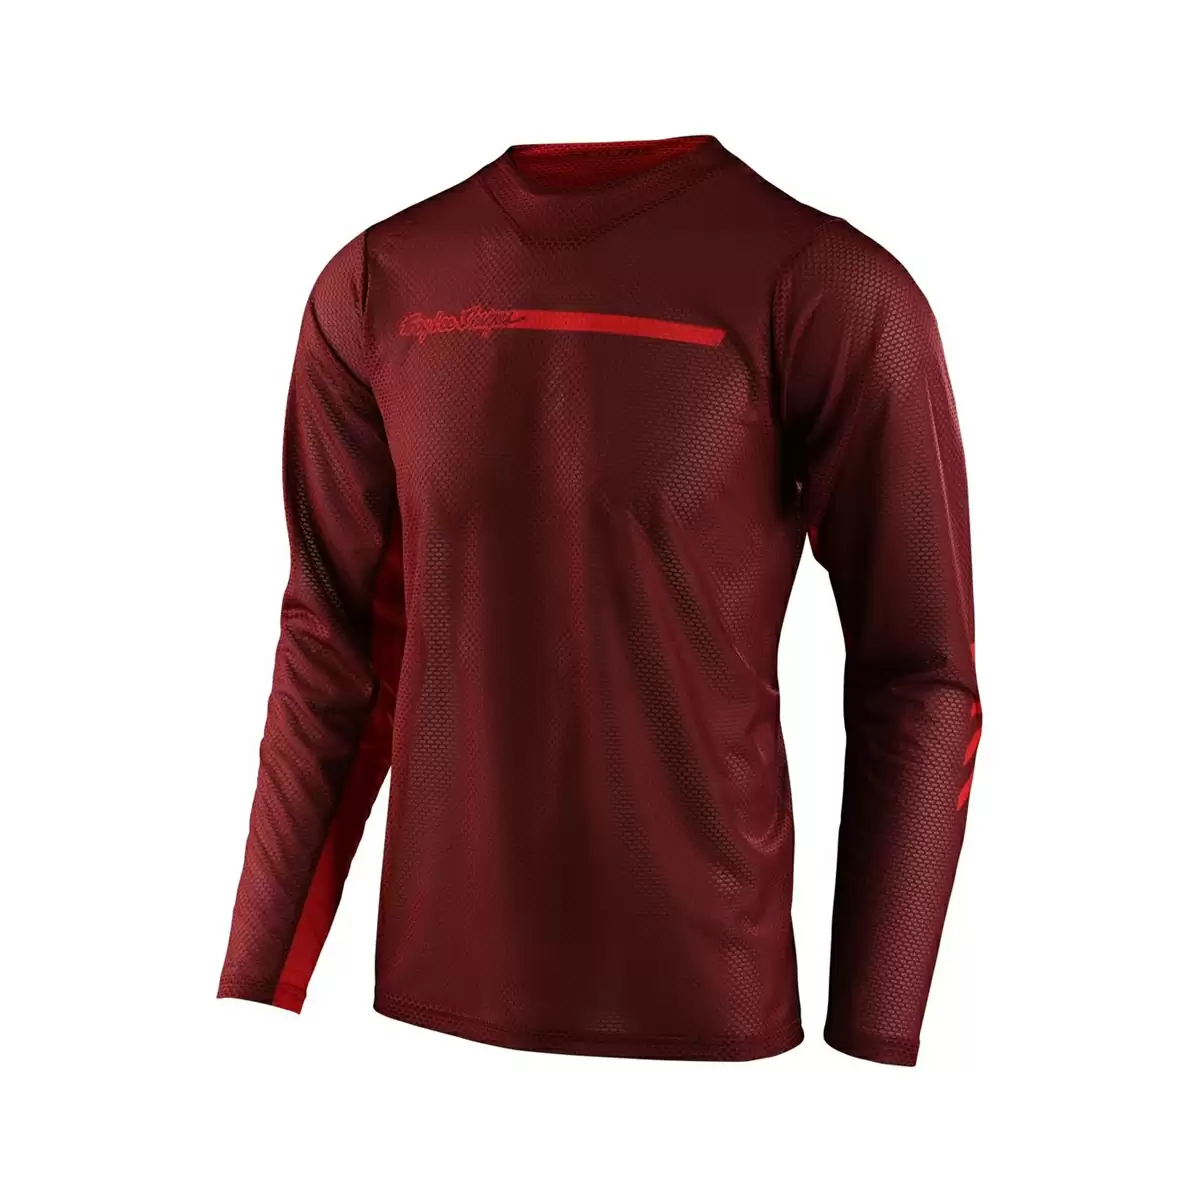 Maillot Skyline Air Channel Manches Longues Rouge Taille L - image